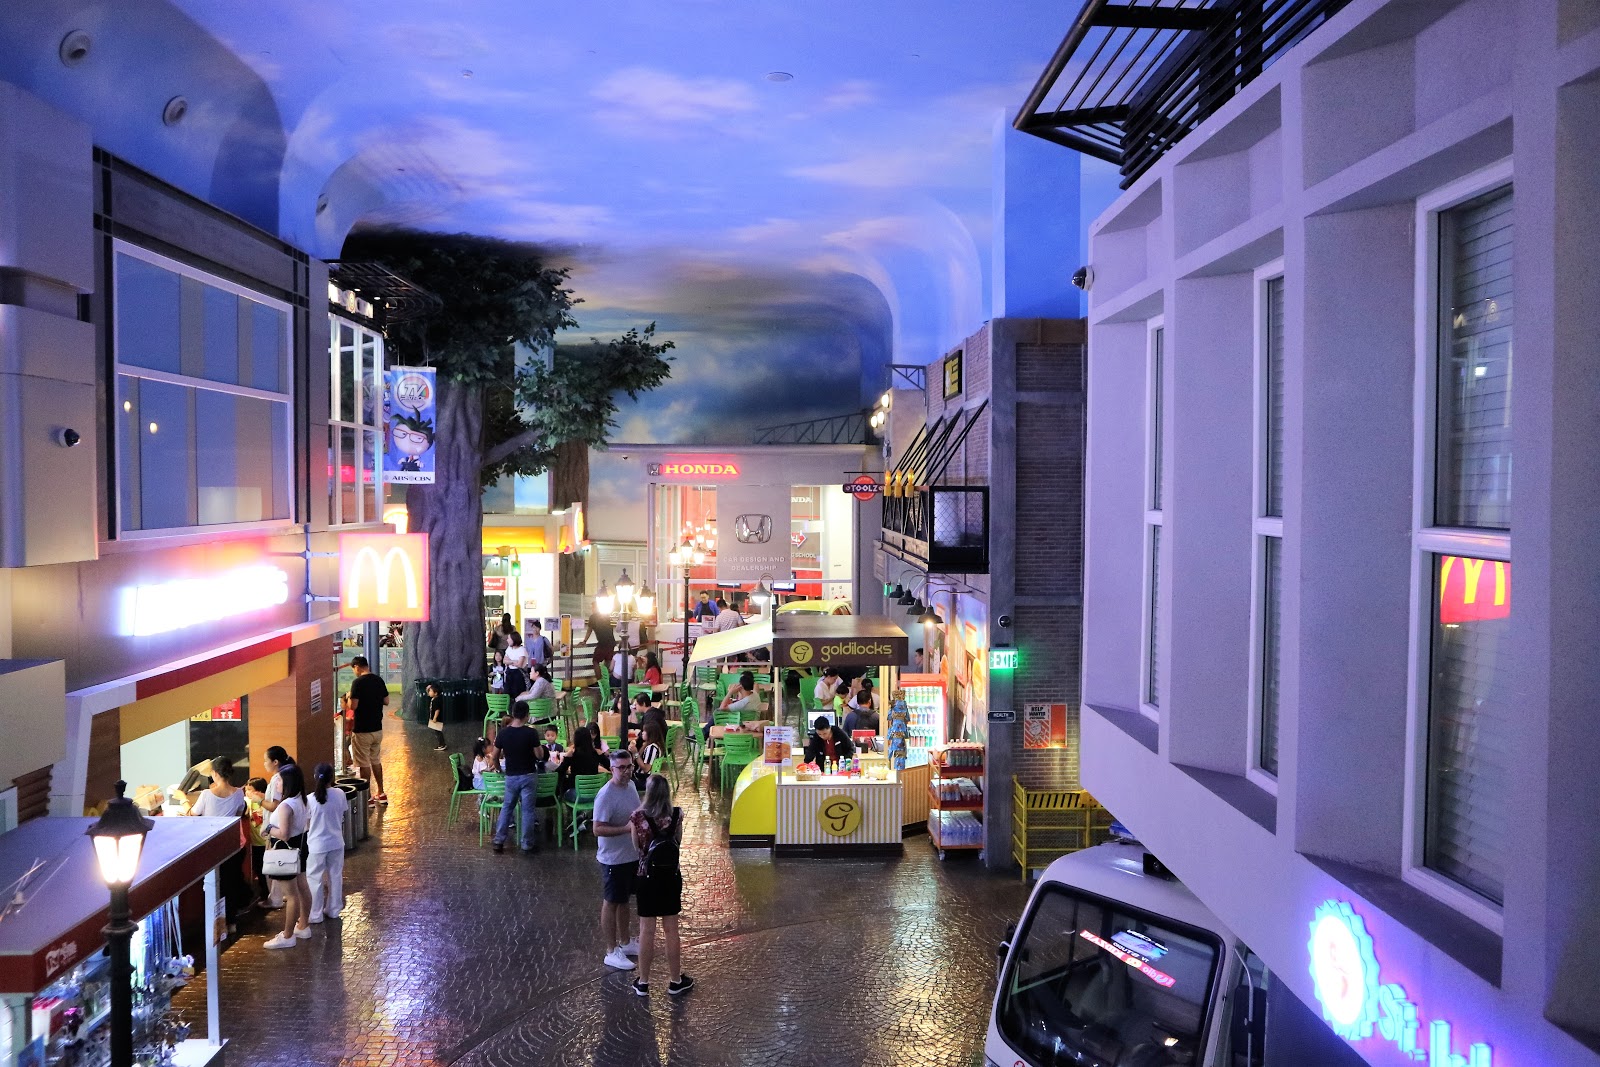 One of the busiest part of the city, the "food park" - KidZania Manila